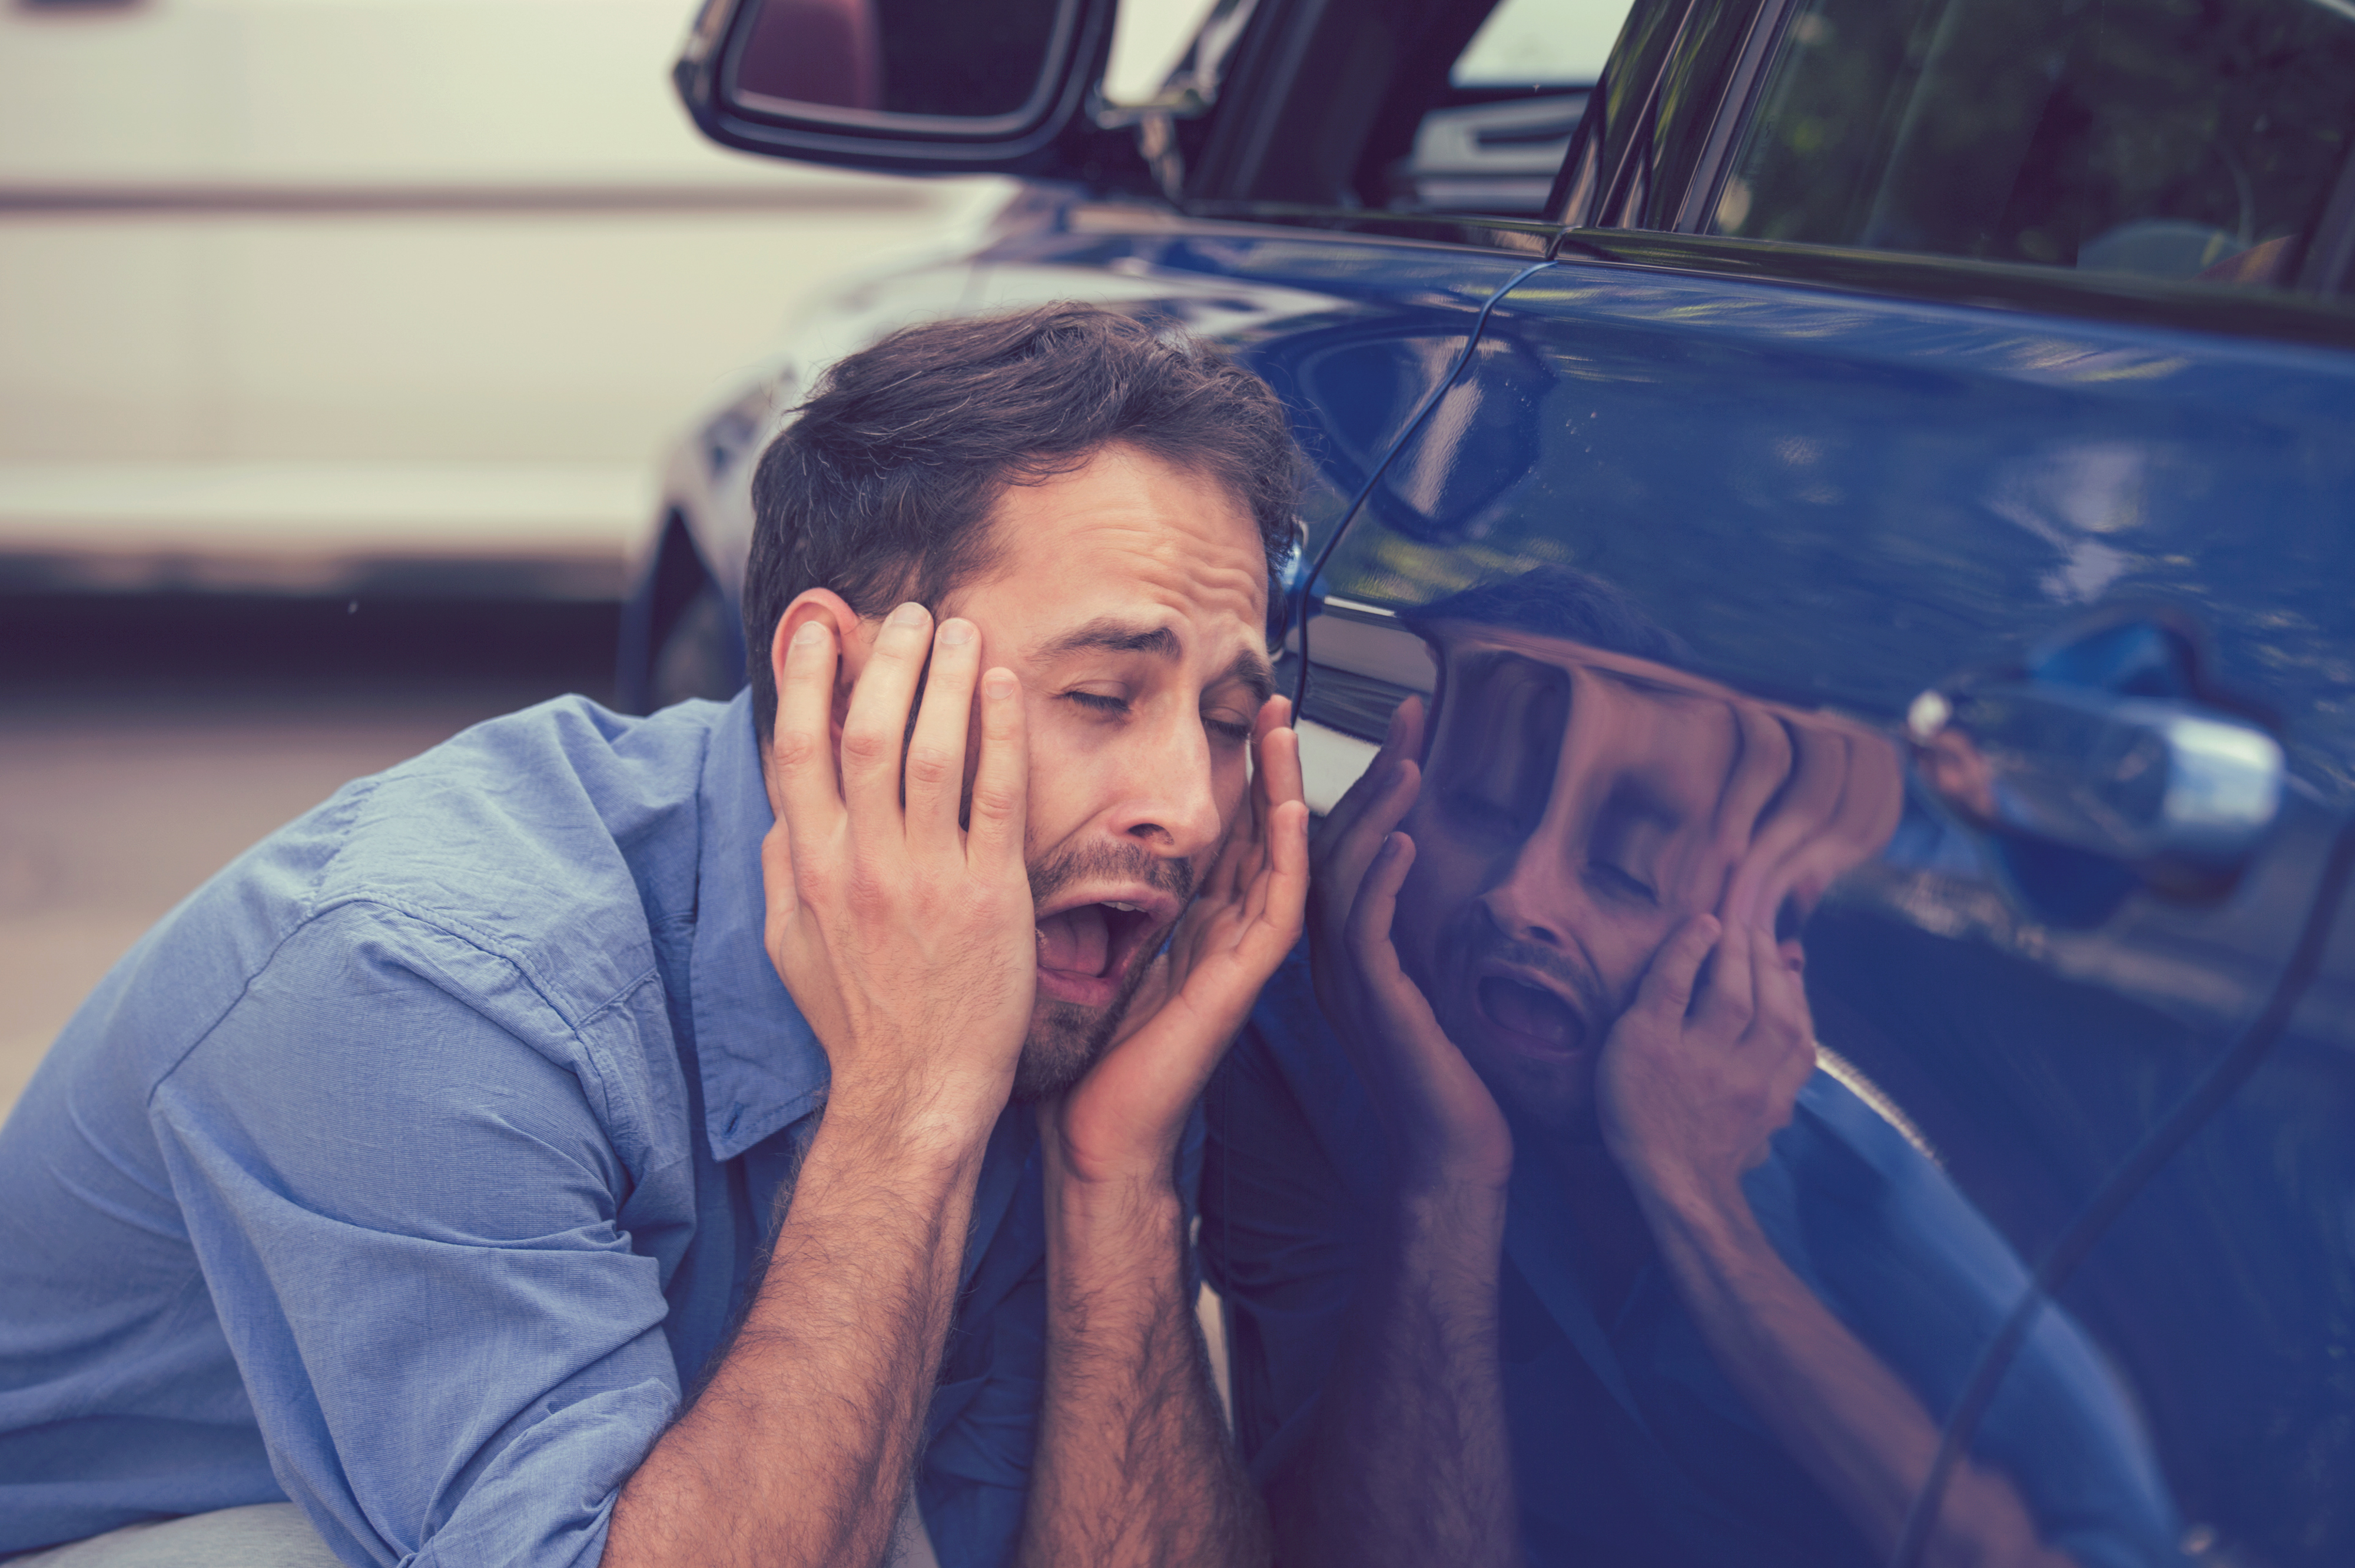 Frustrated upset young man looking at scratches and dents on his car outdoors | Source: Getty Images